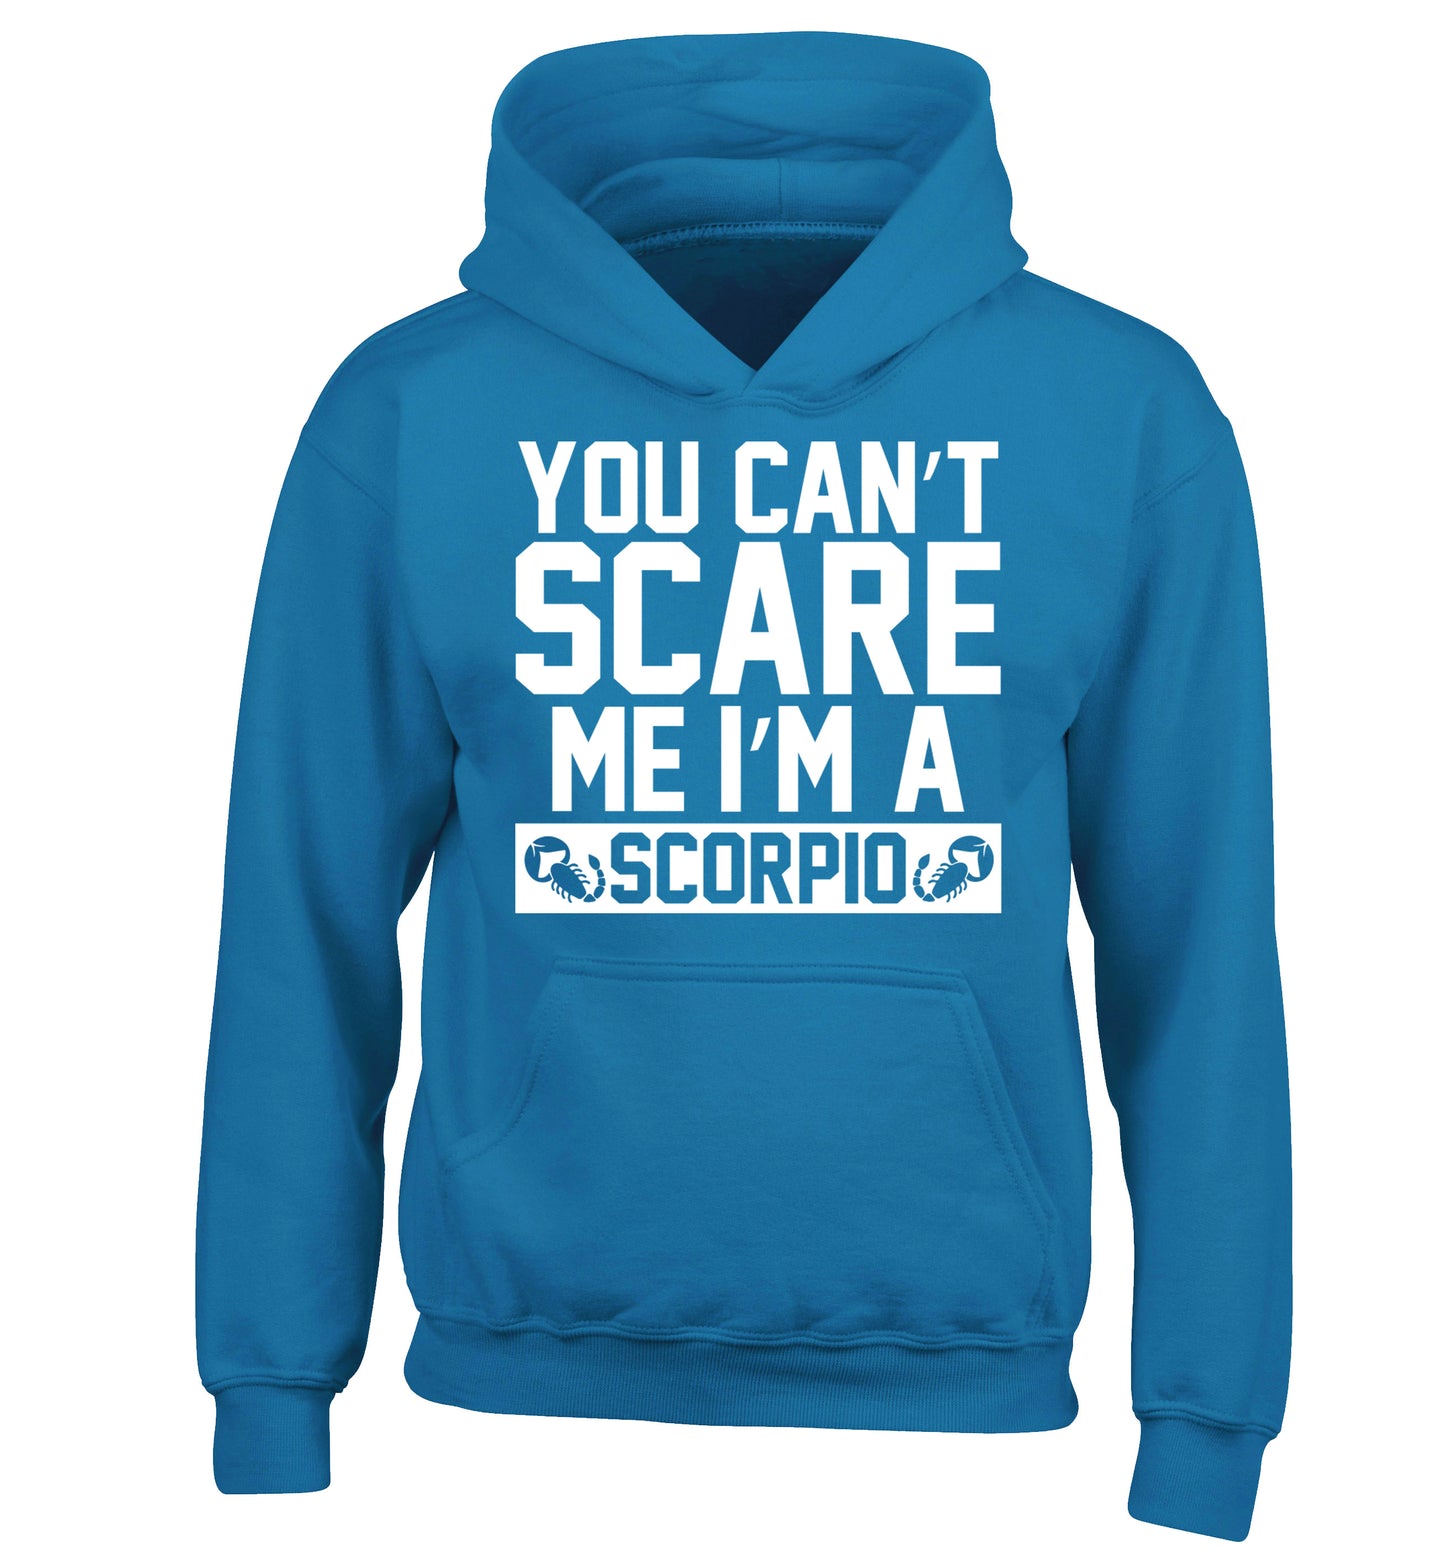 You can't scare me I'm a scorpio children's blue hoodie 12-13 Years